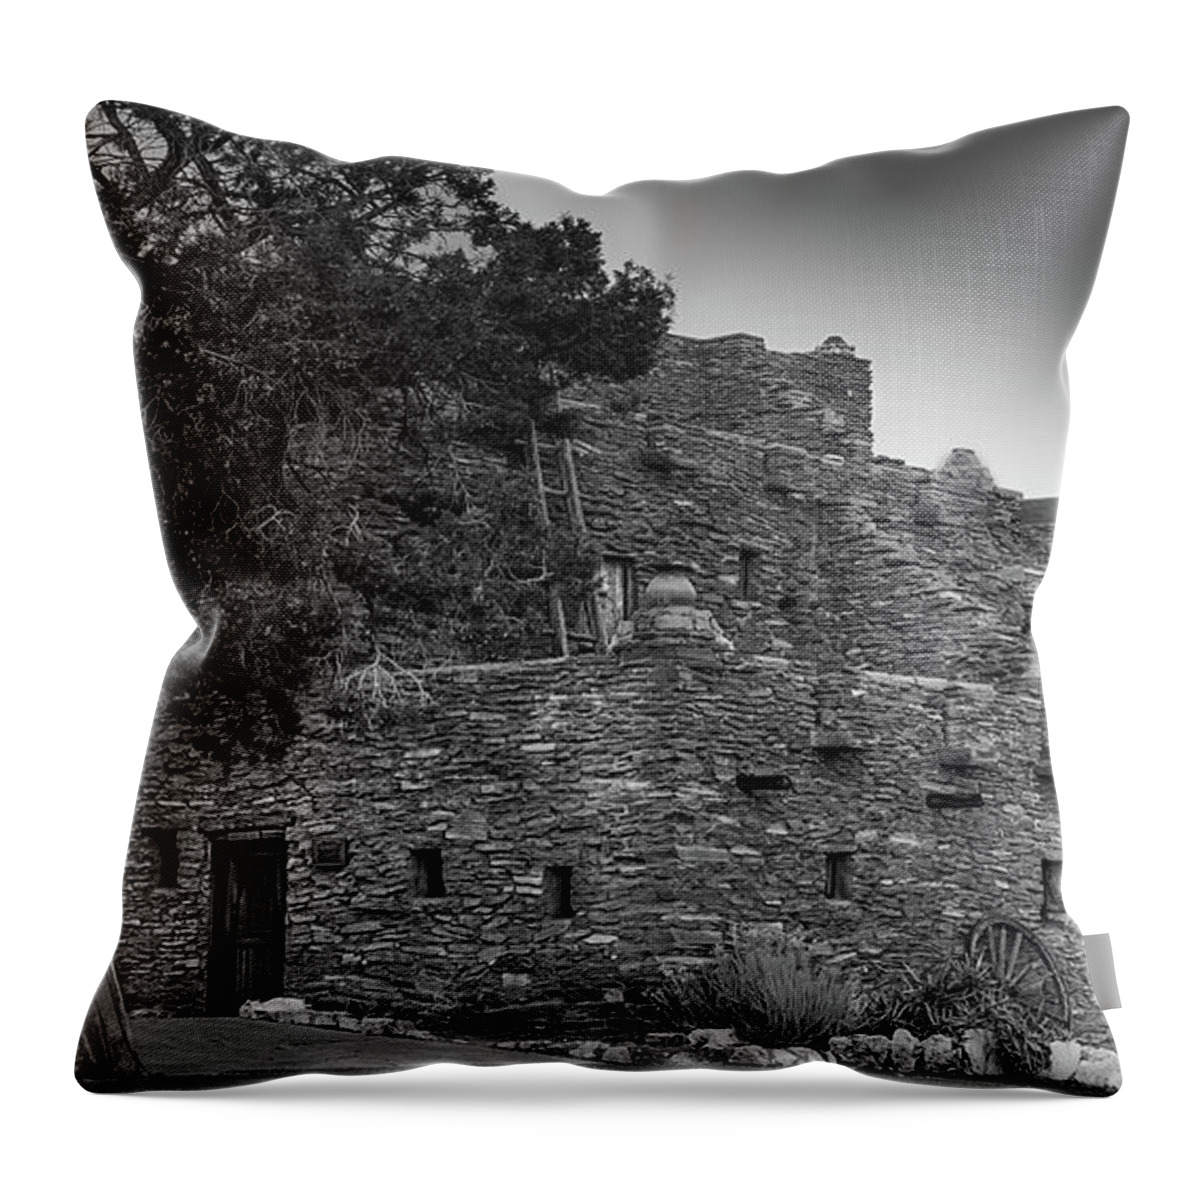 Hopi House Throw Pillow featuring the photograph Hopi House by Al Judge